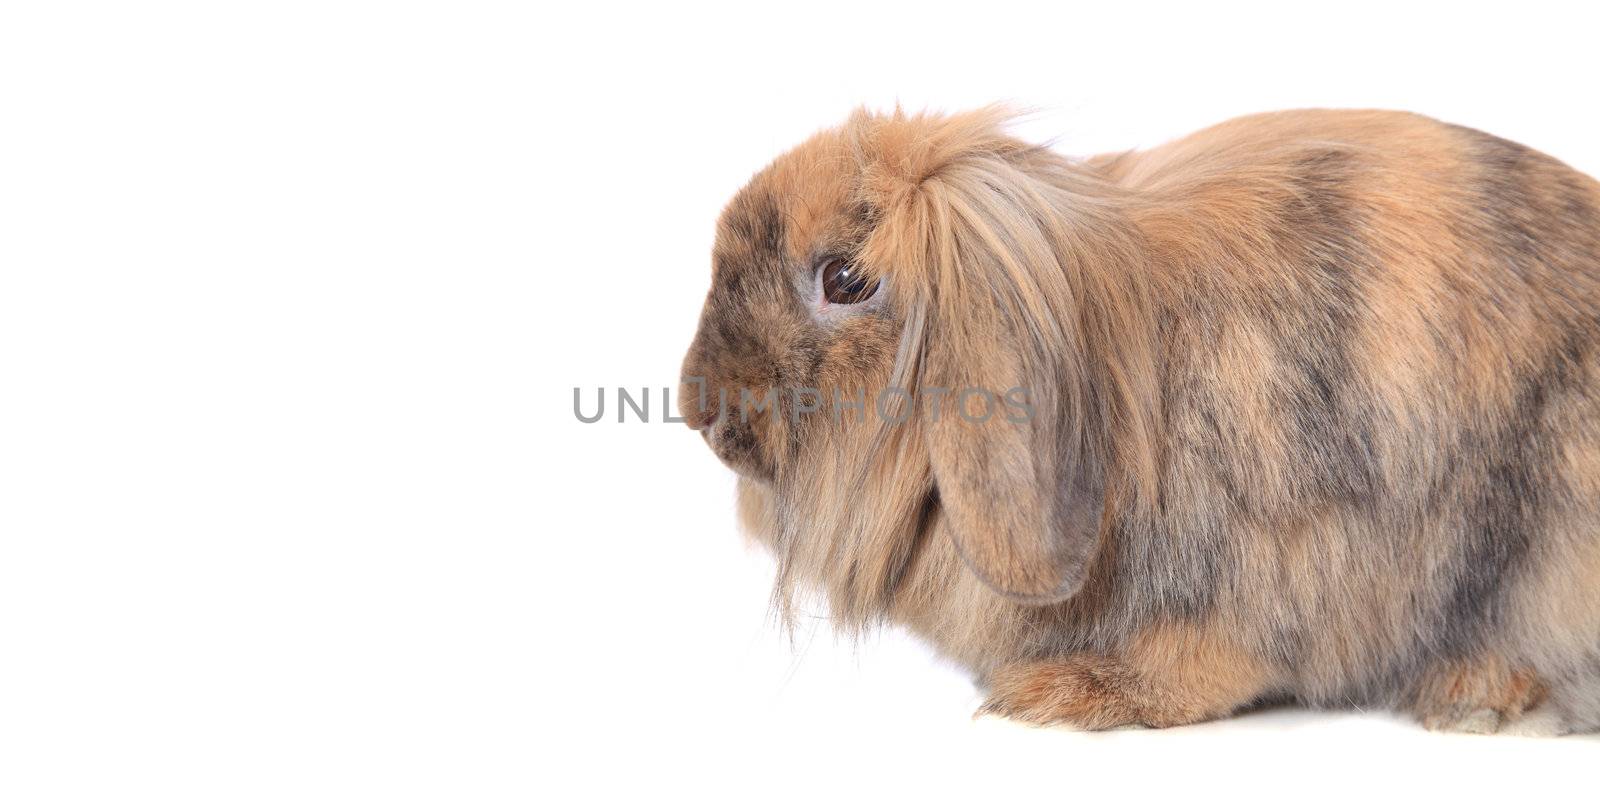 Cute little rabbit. All on white background.